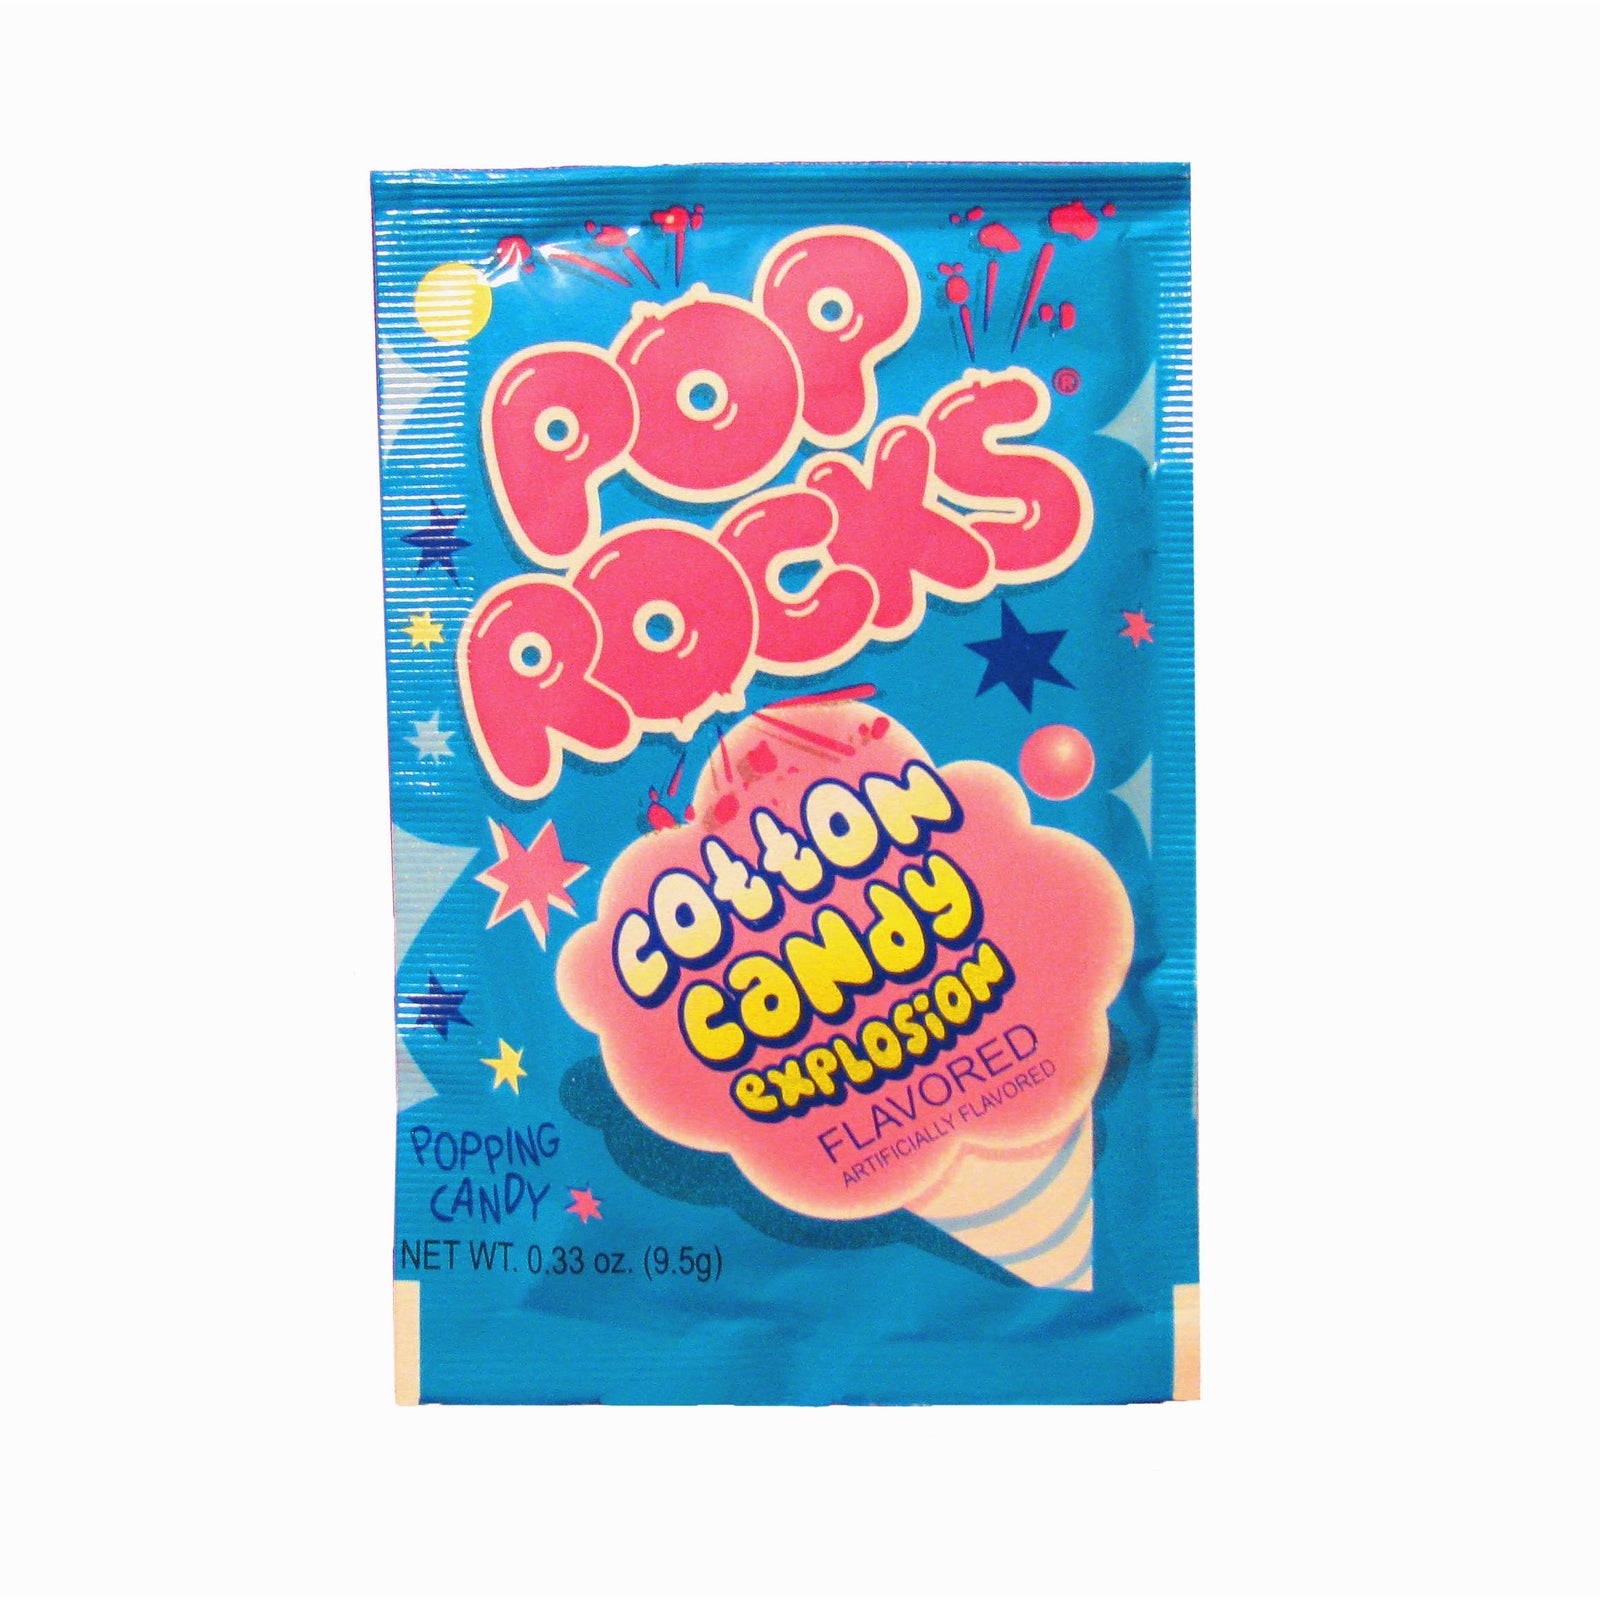 Pop Rocks Popping Candy - Cotton Candy Flavored